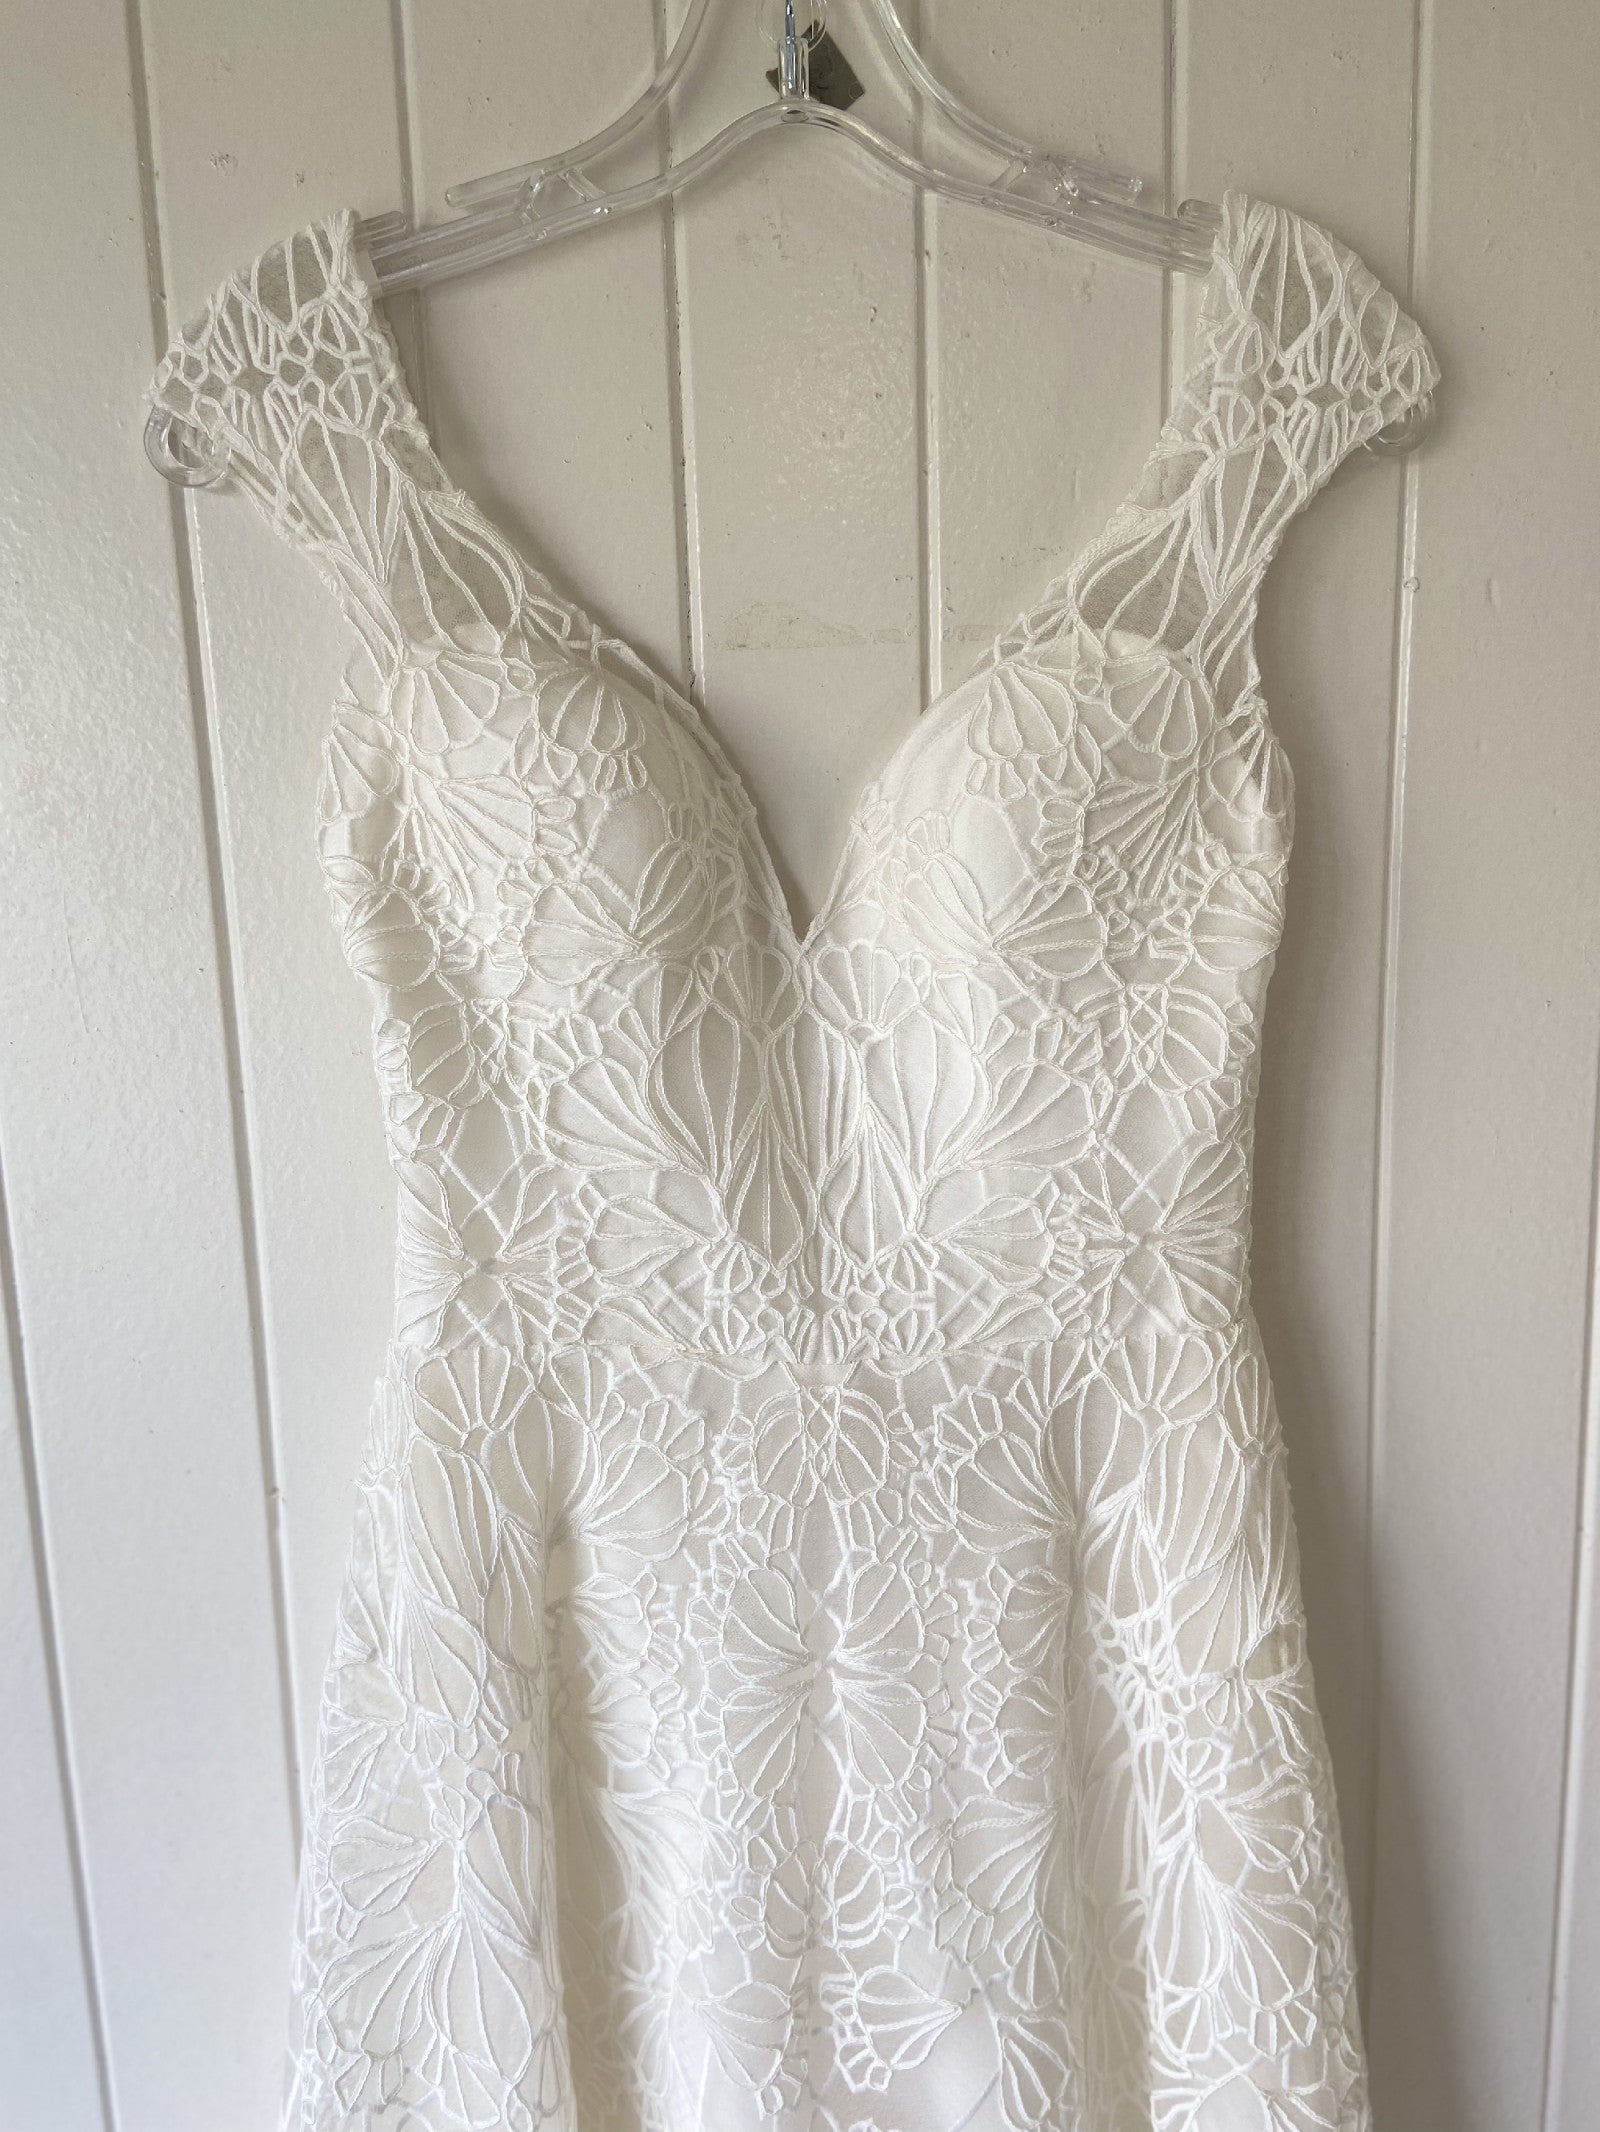 BHLDN Rockland Gown